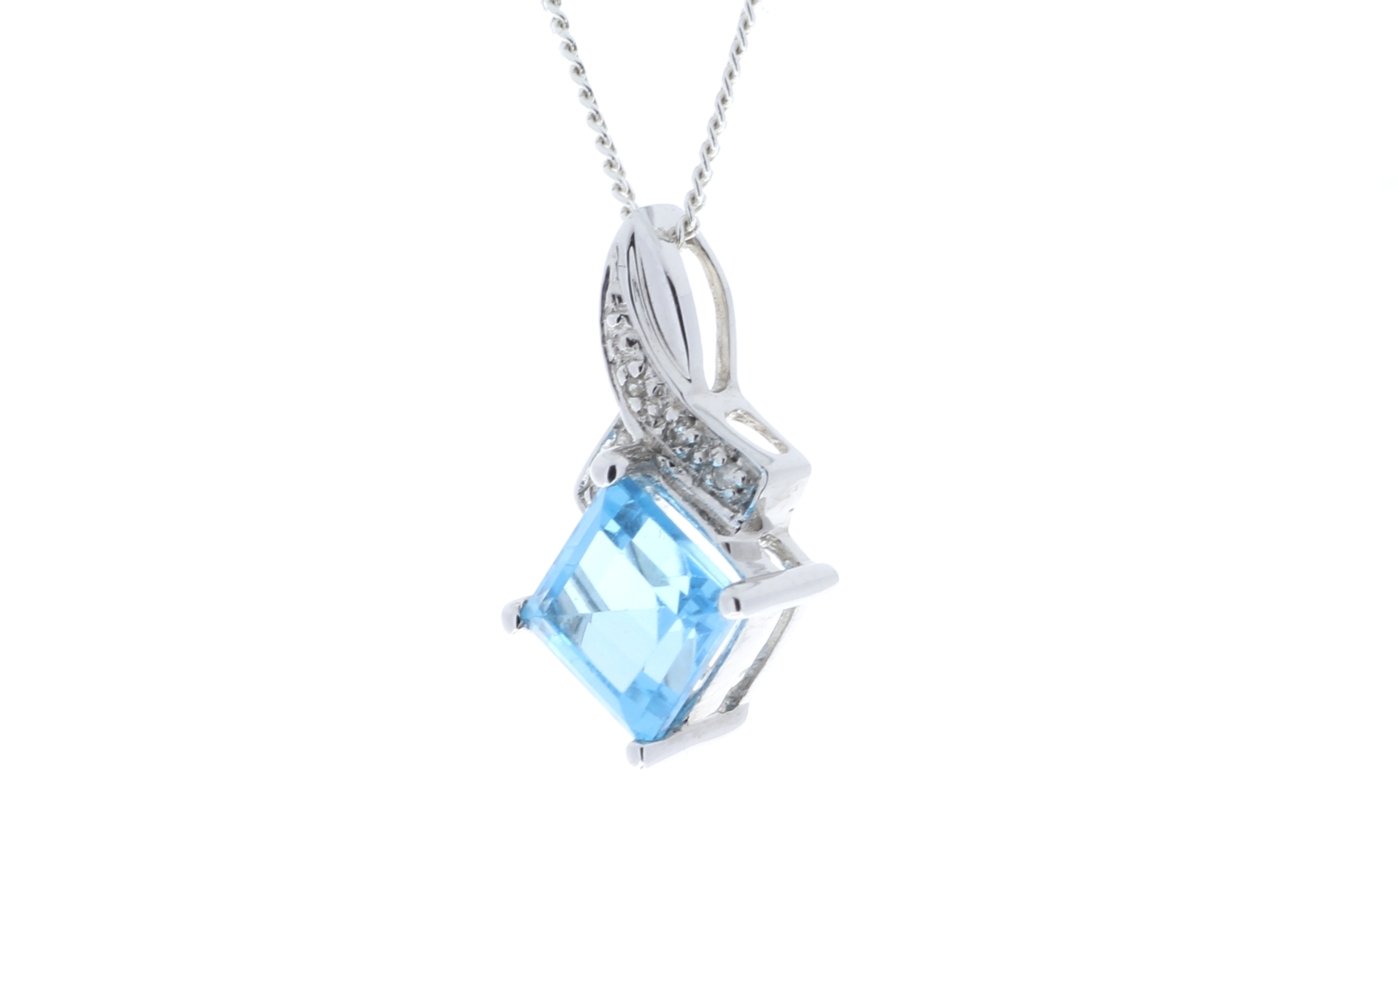 9ct White Gold Diamond And Blue Topaz Pendant 0.02 Carats - Image 4 of 5